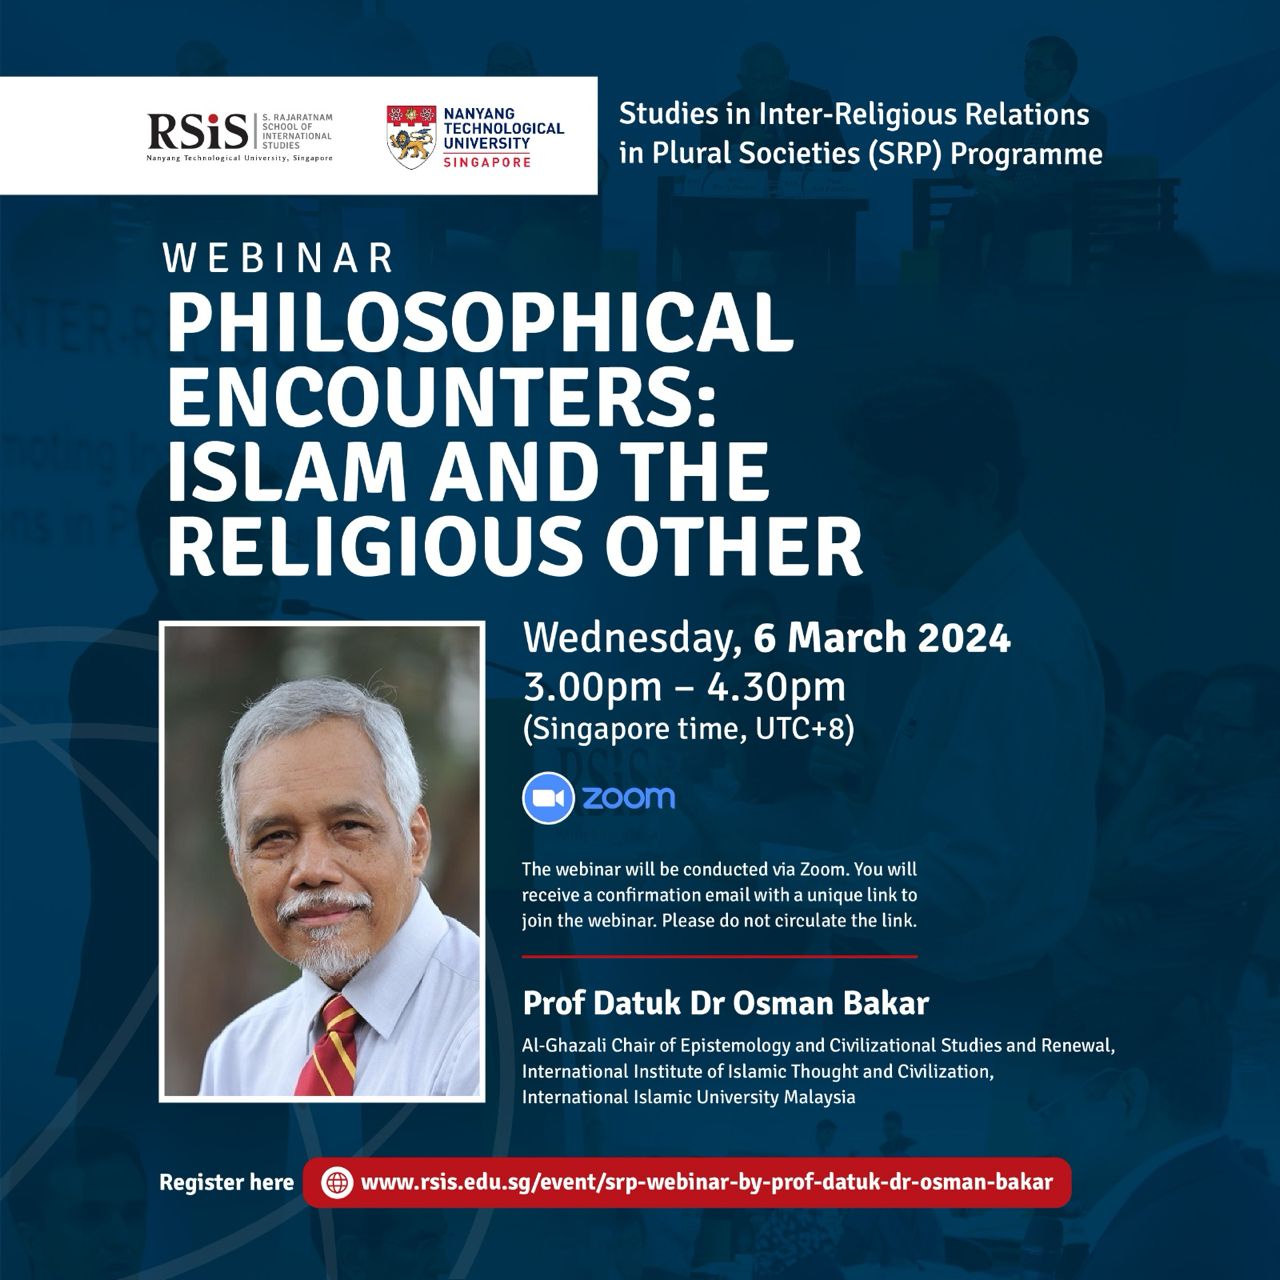 PHILOSOPHICAL ENCOUNTERS: ISLAM AND THE RELIGIOUS OTHER